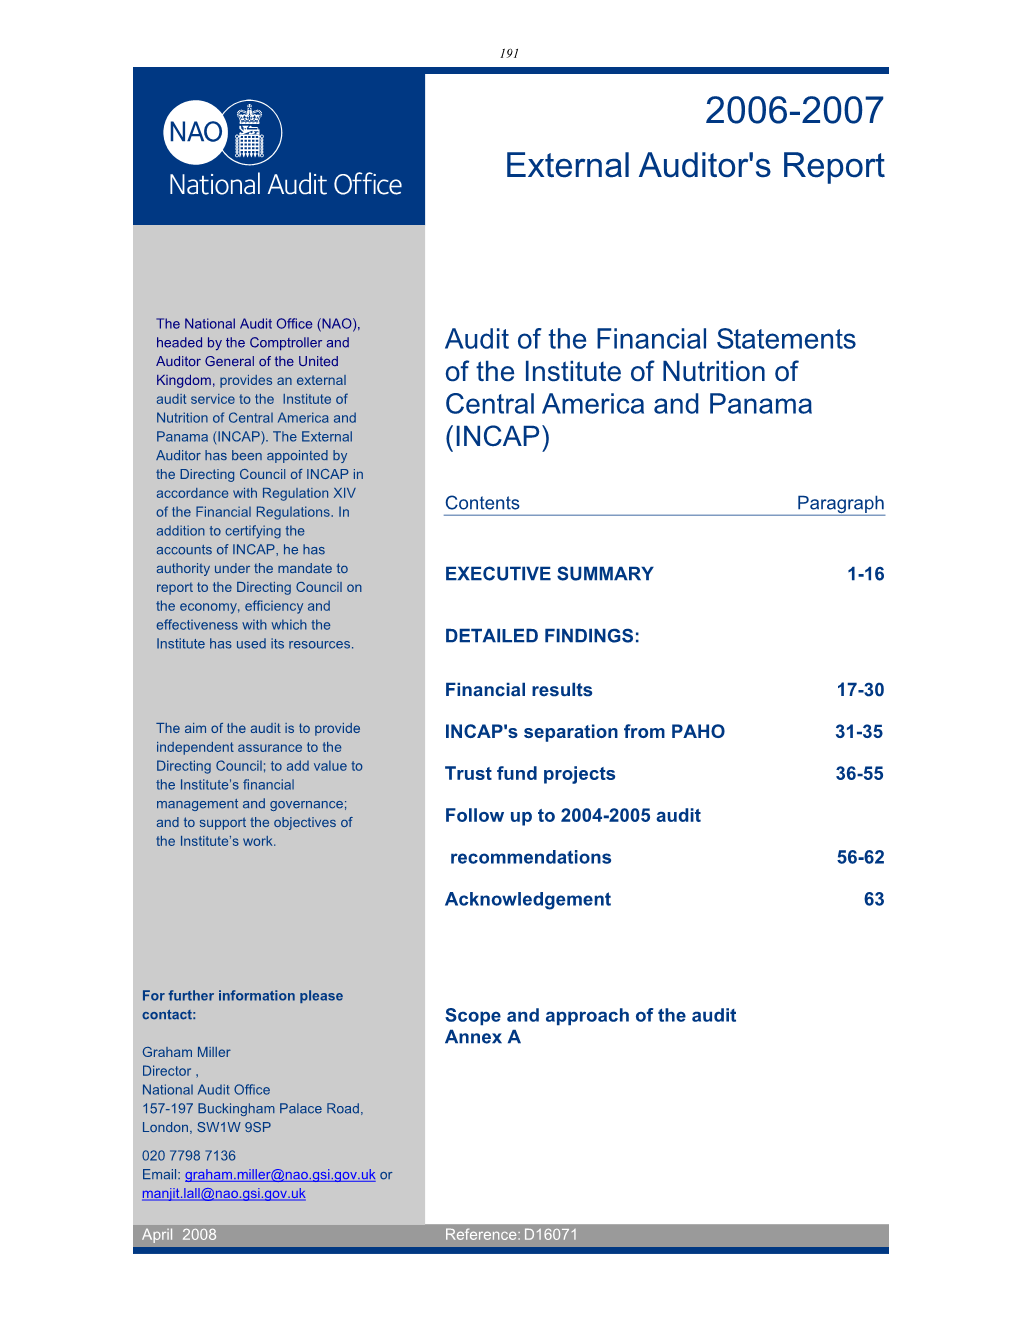 Report of the External Auditor